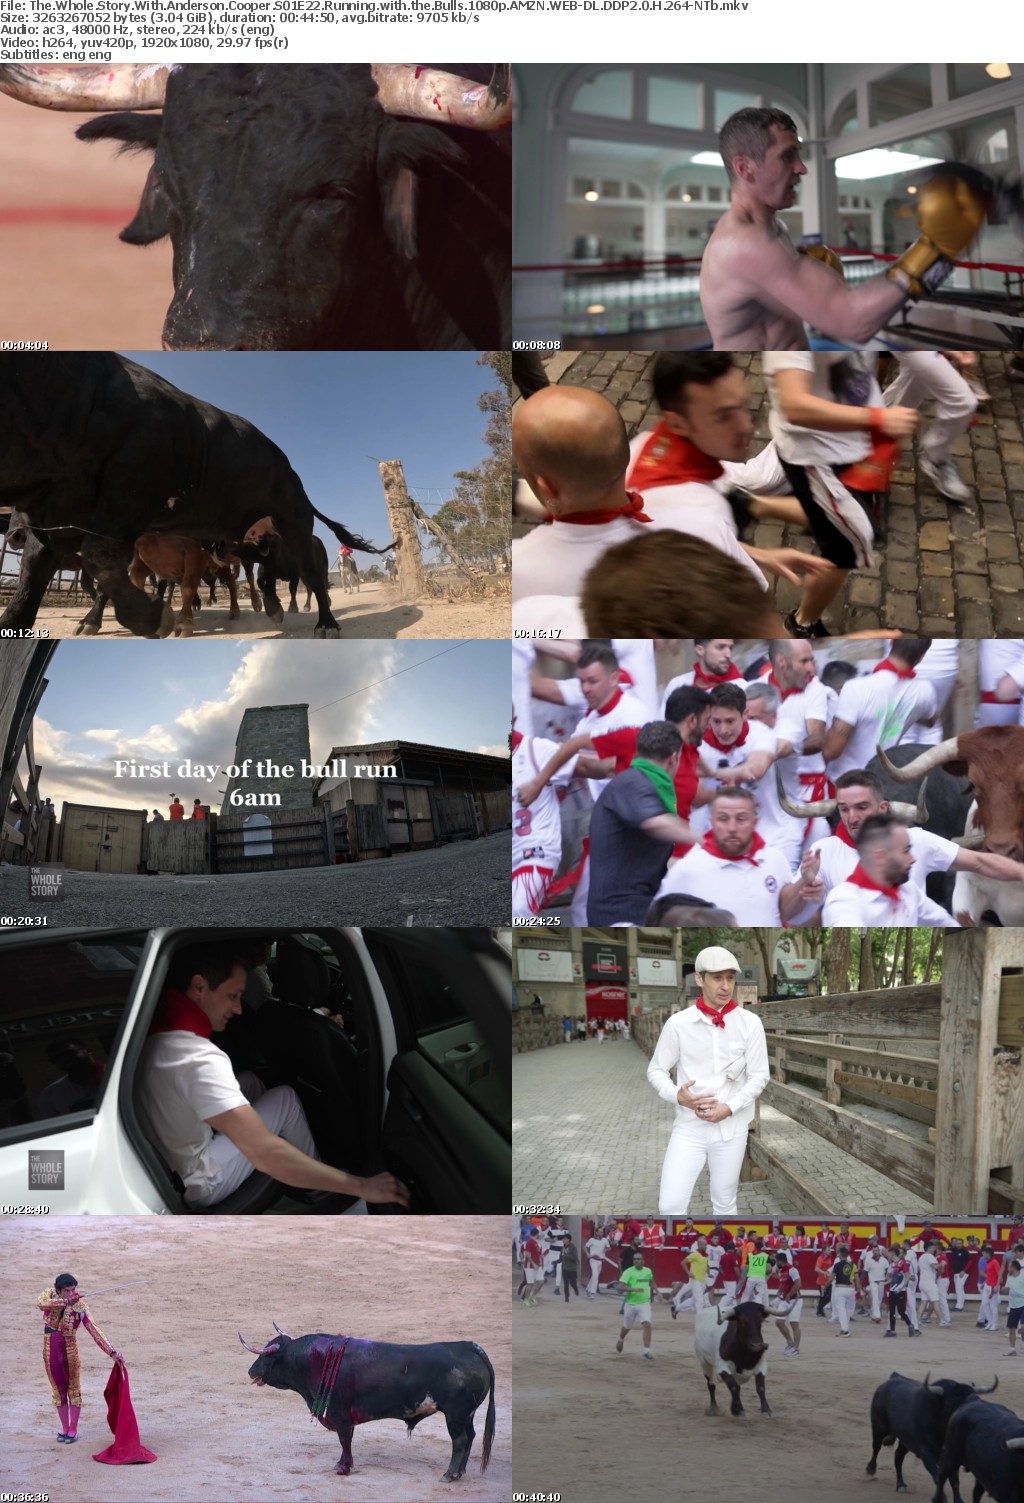 The Whole Story With Anderson Cooper S01E22 Running with the Bulls 1080p AMZN WEB-DL DDP2 0 H 264-NTb